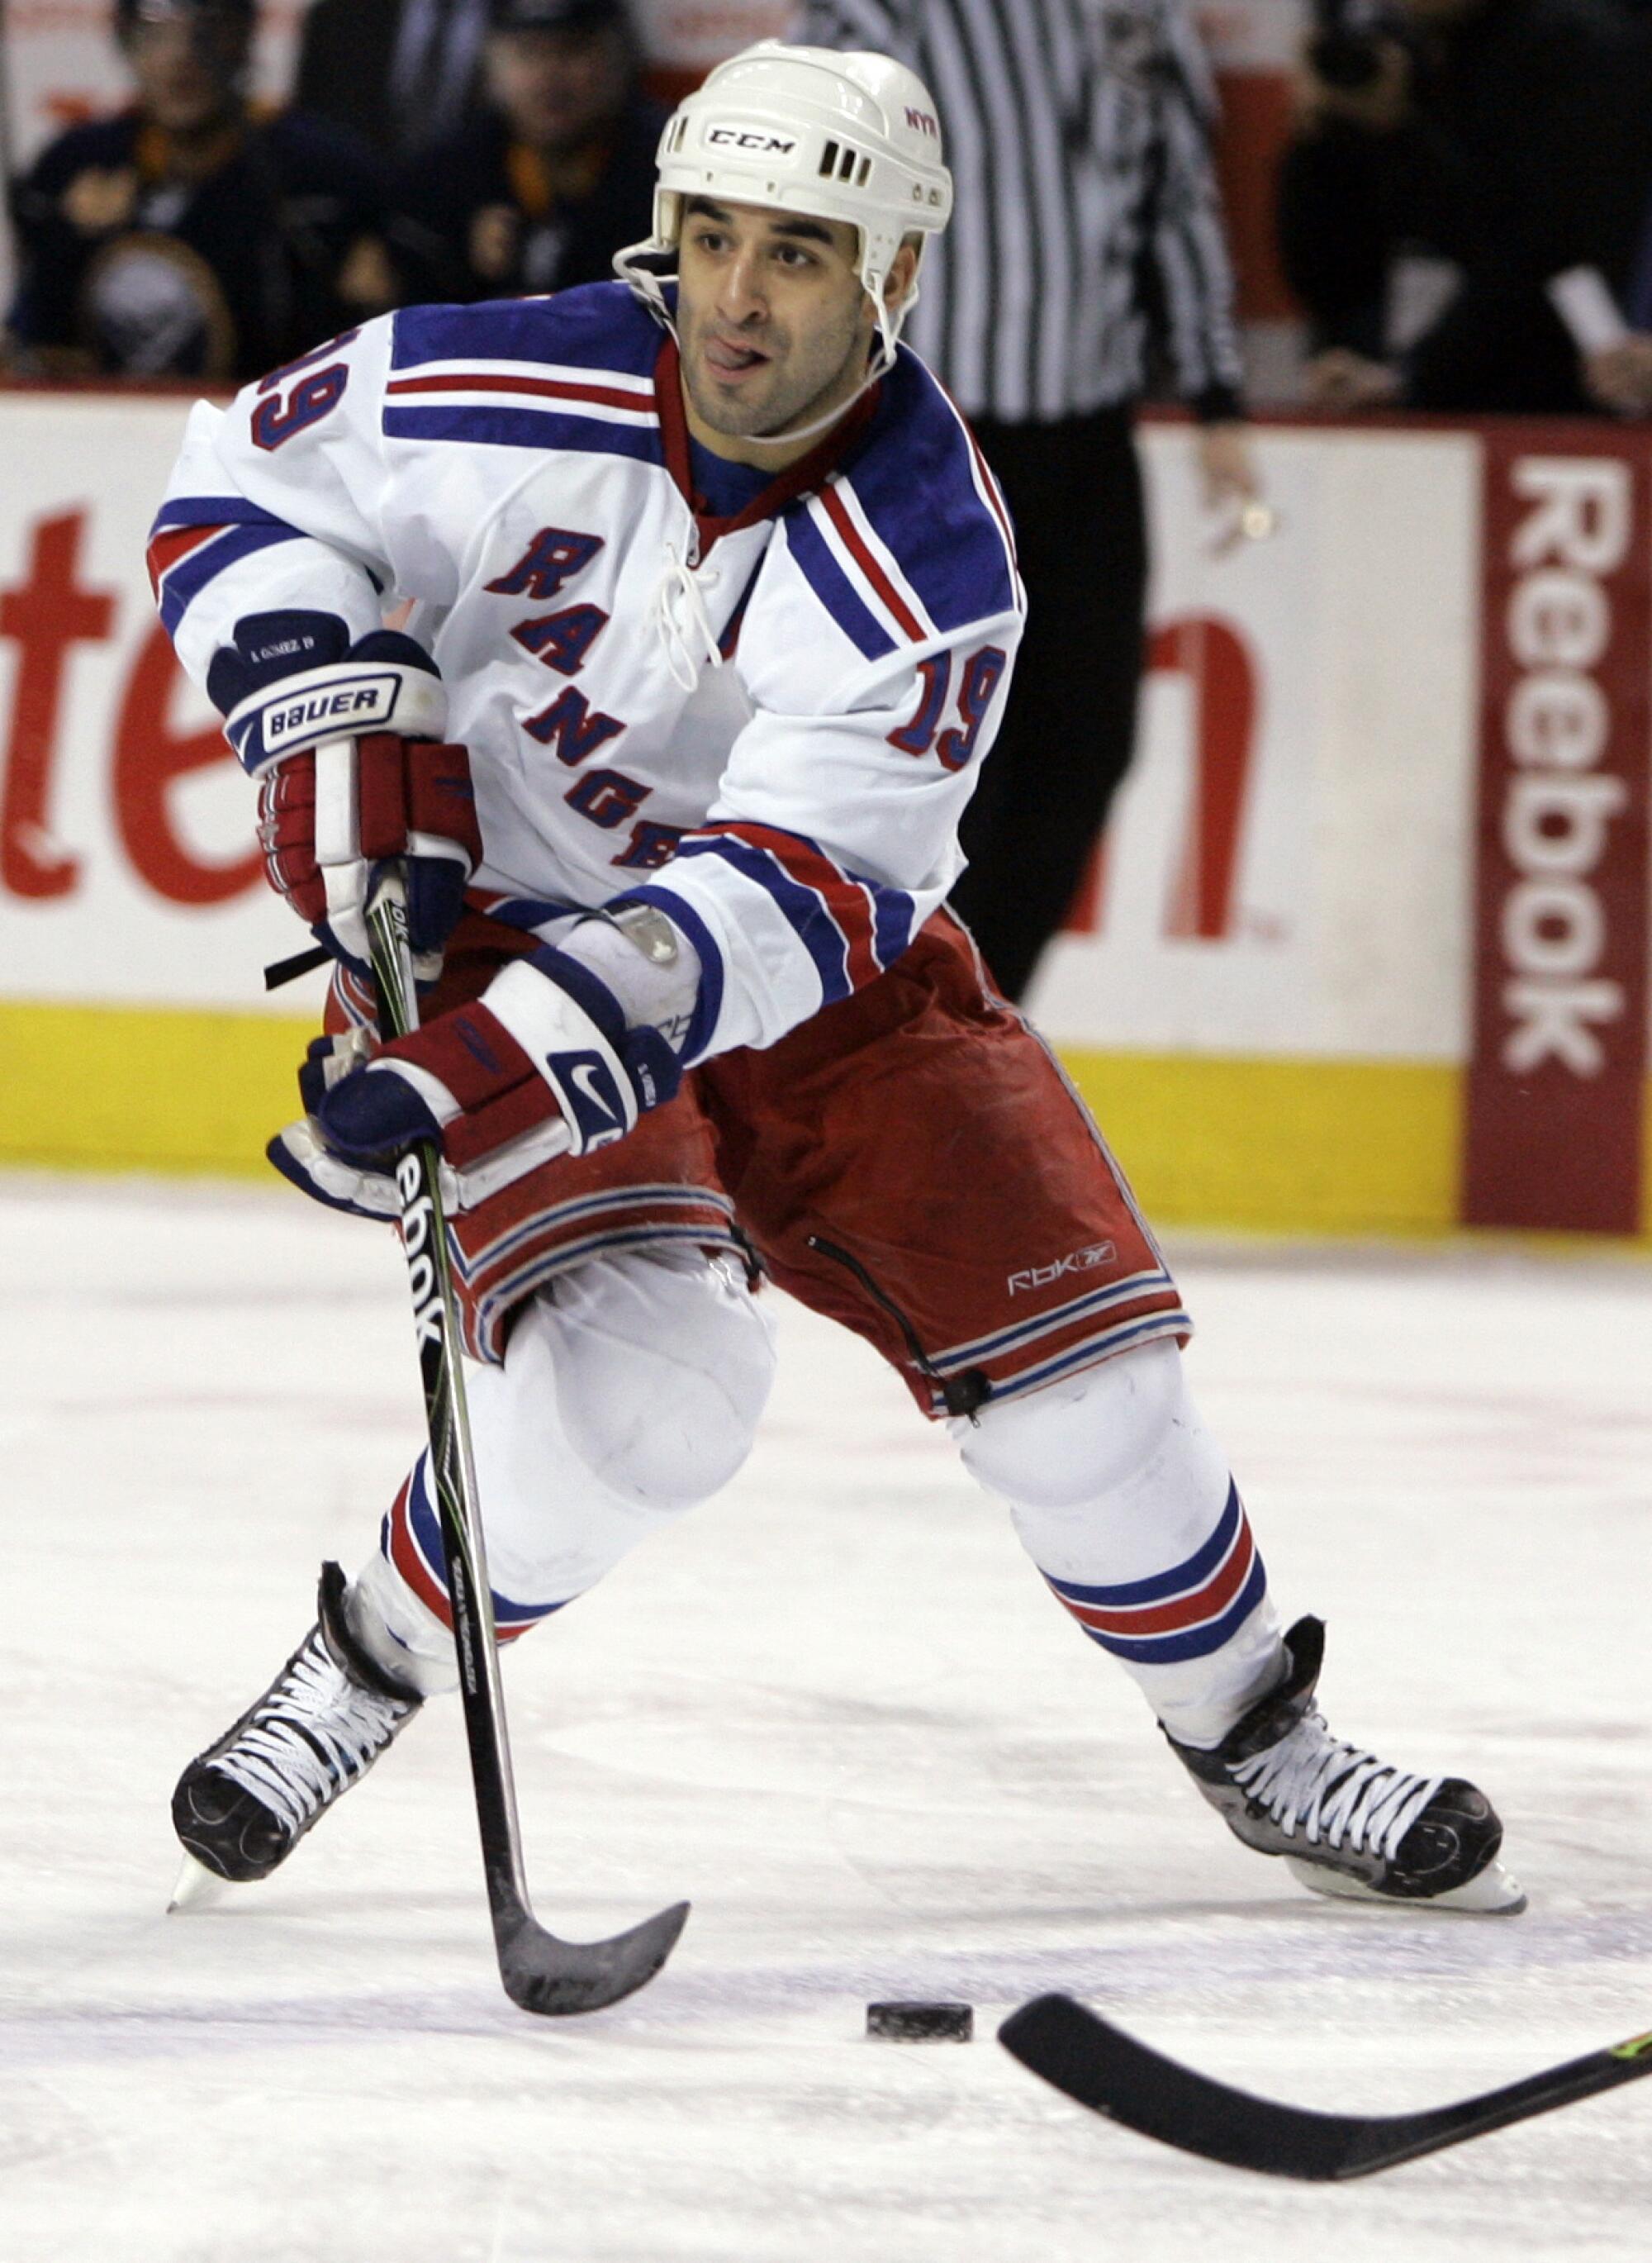 The Rangers' Scott Gomez looks to pass during the second period of a 2009 NHL game against the Sabres 